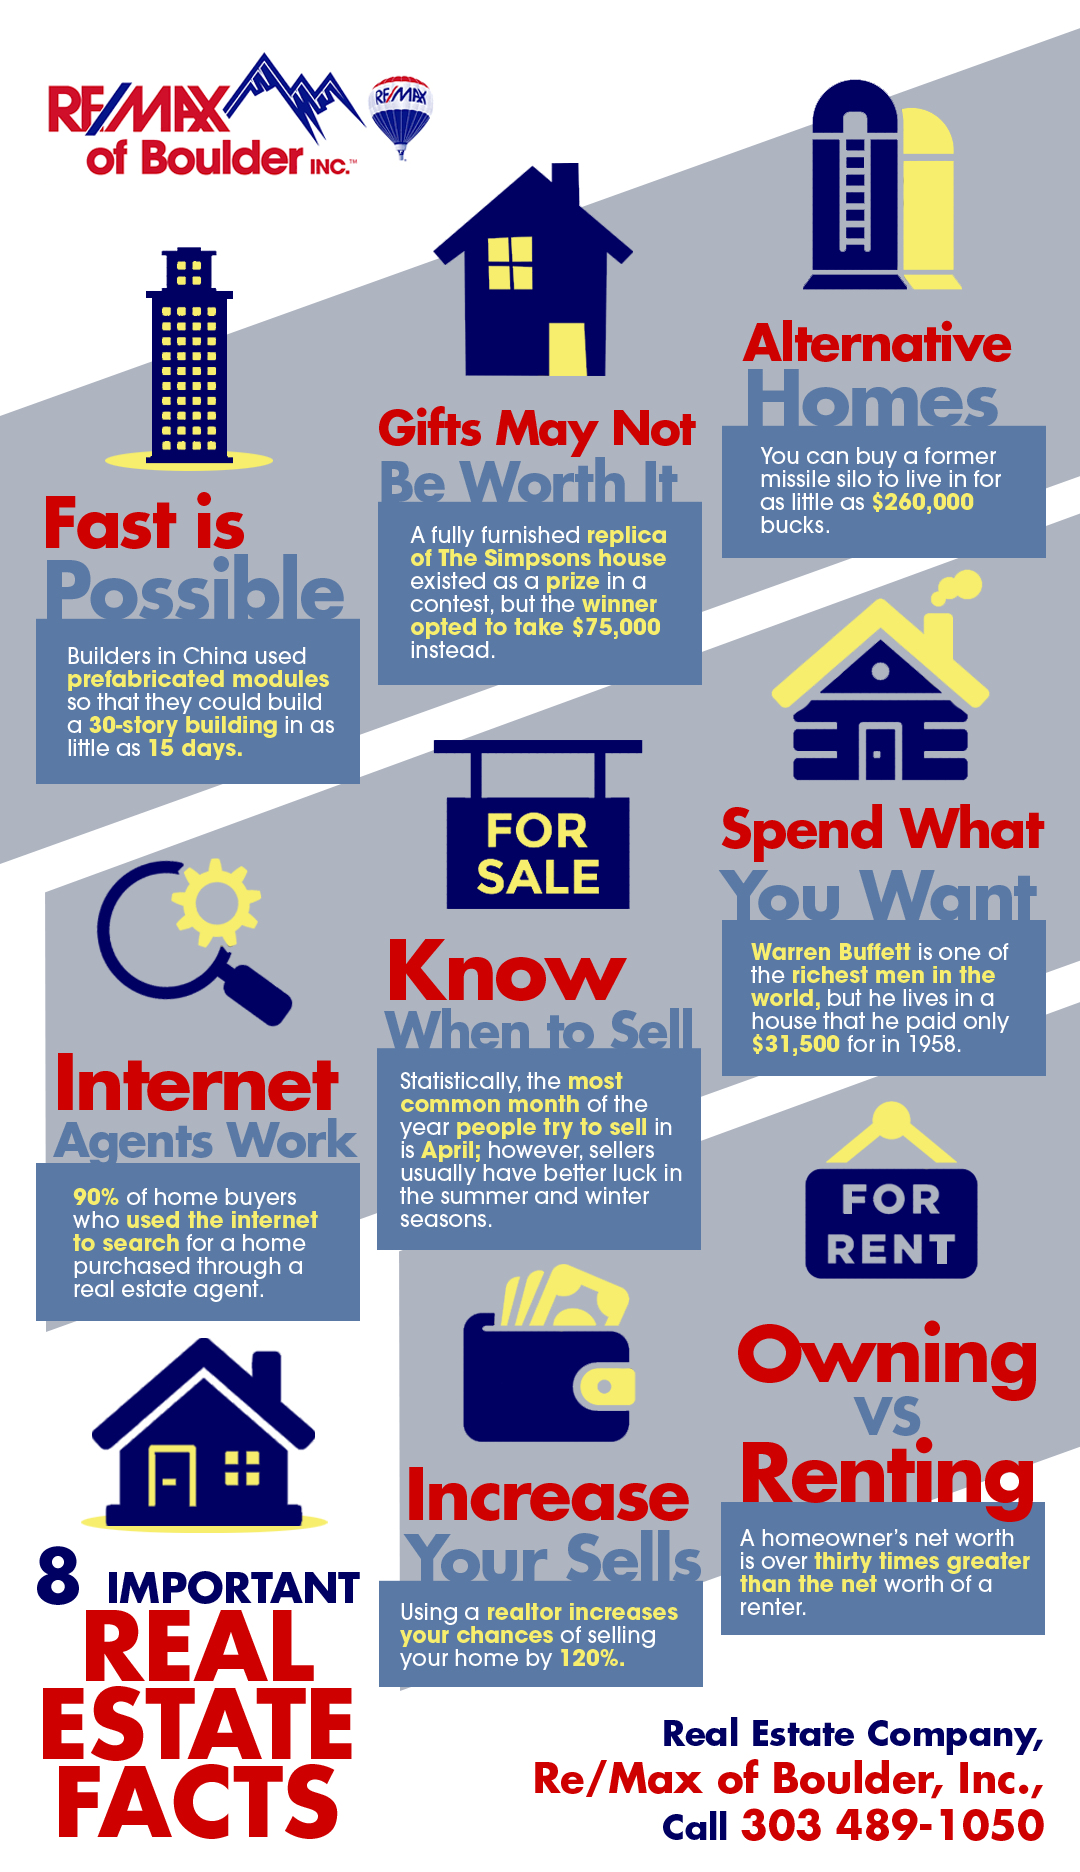 8 Important Real Estate Facts Shared Info Graphics